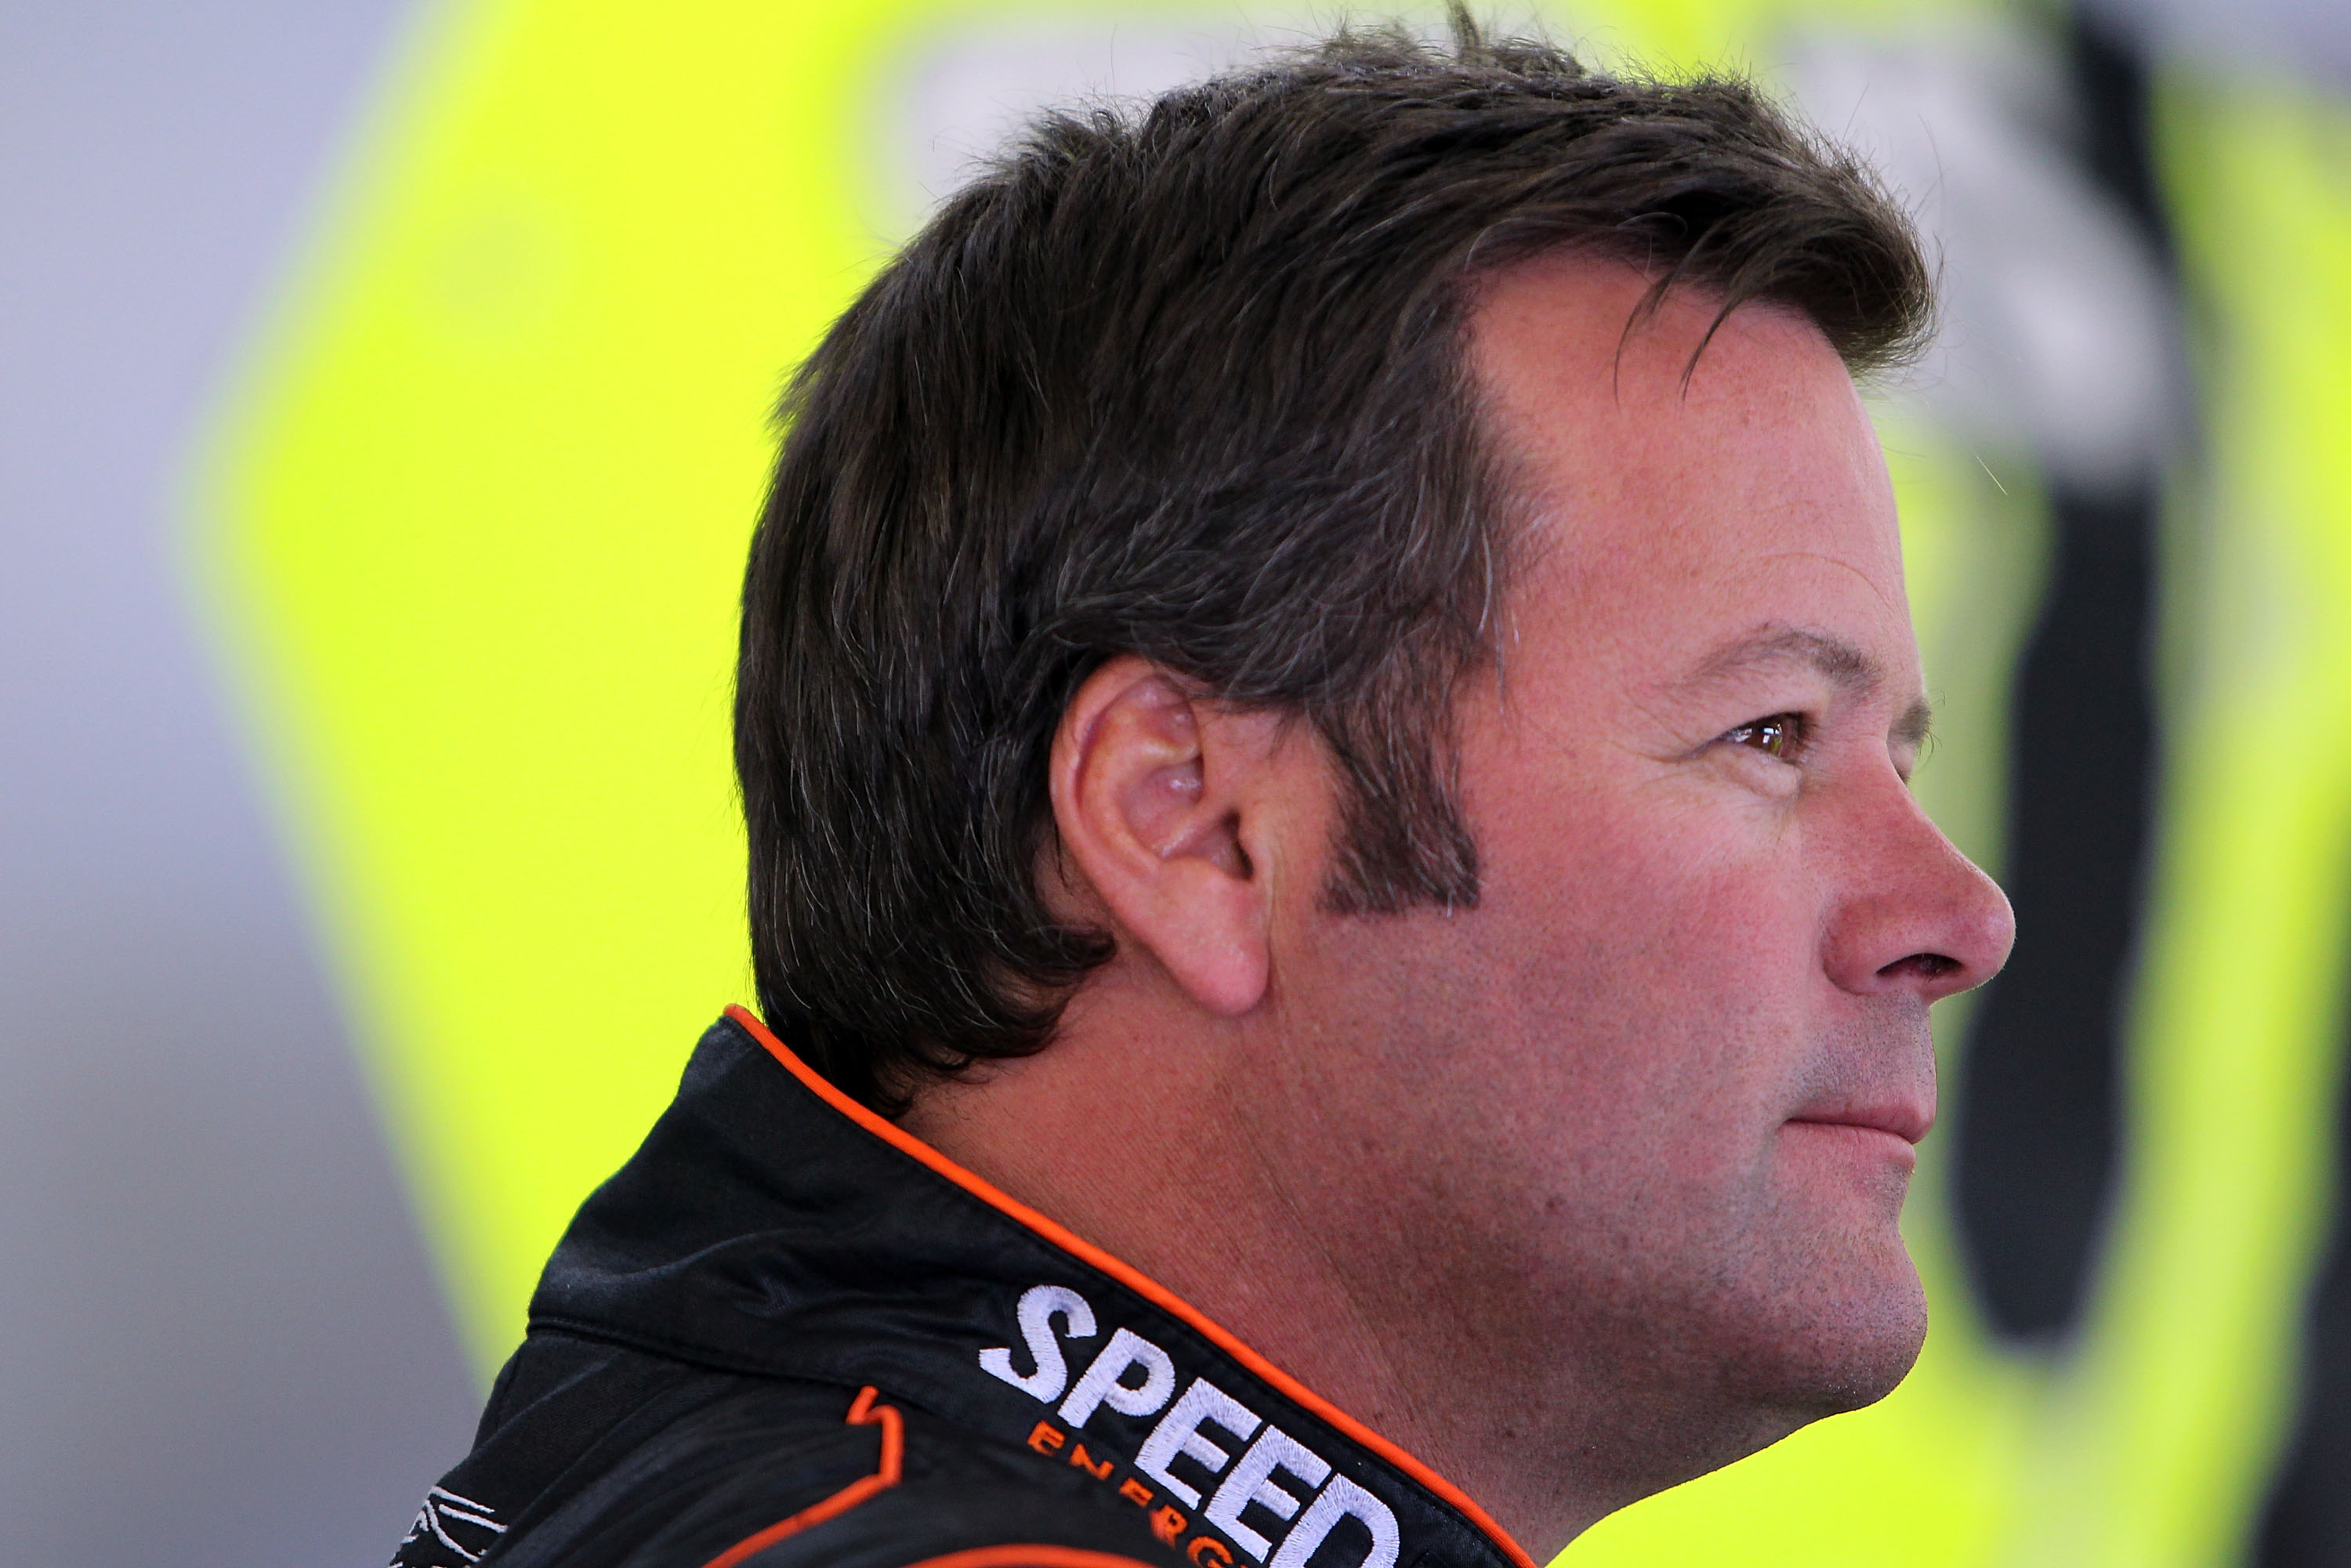 LAS VEGAS, NV - MARCH 04:  Robby Gordon, driver of the #7 Speed Energy Dodge, stands in the garage during practice for the NASCAR Sprint Cup Series Kobalt Tools 400 at Las Vegas Motor Speedway on March 4, 2011 in Las Vegas, Nevada.  (Photo by Jonathan Fer